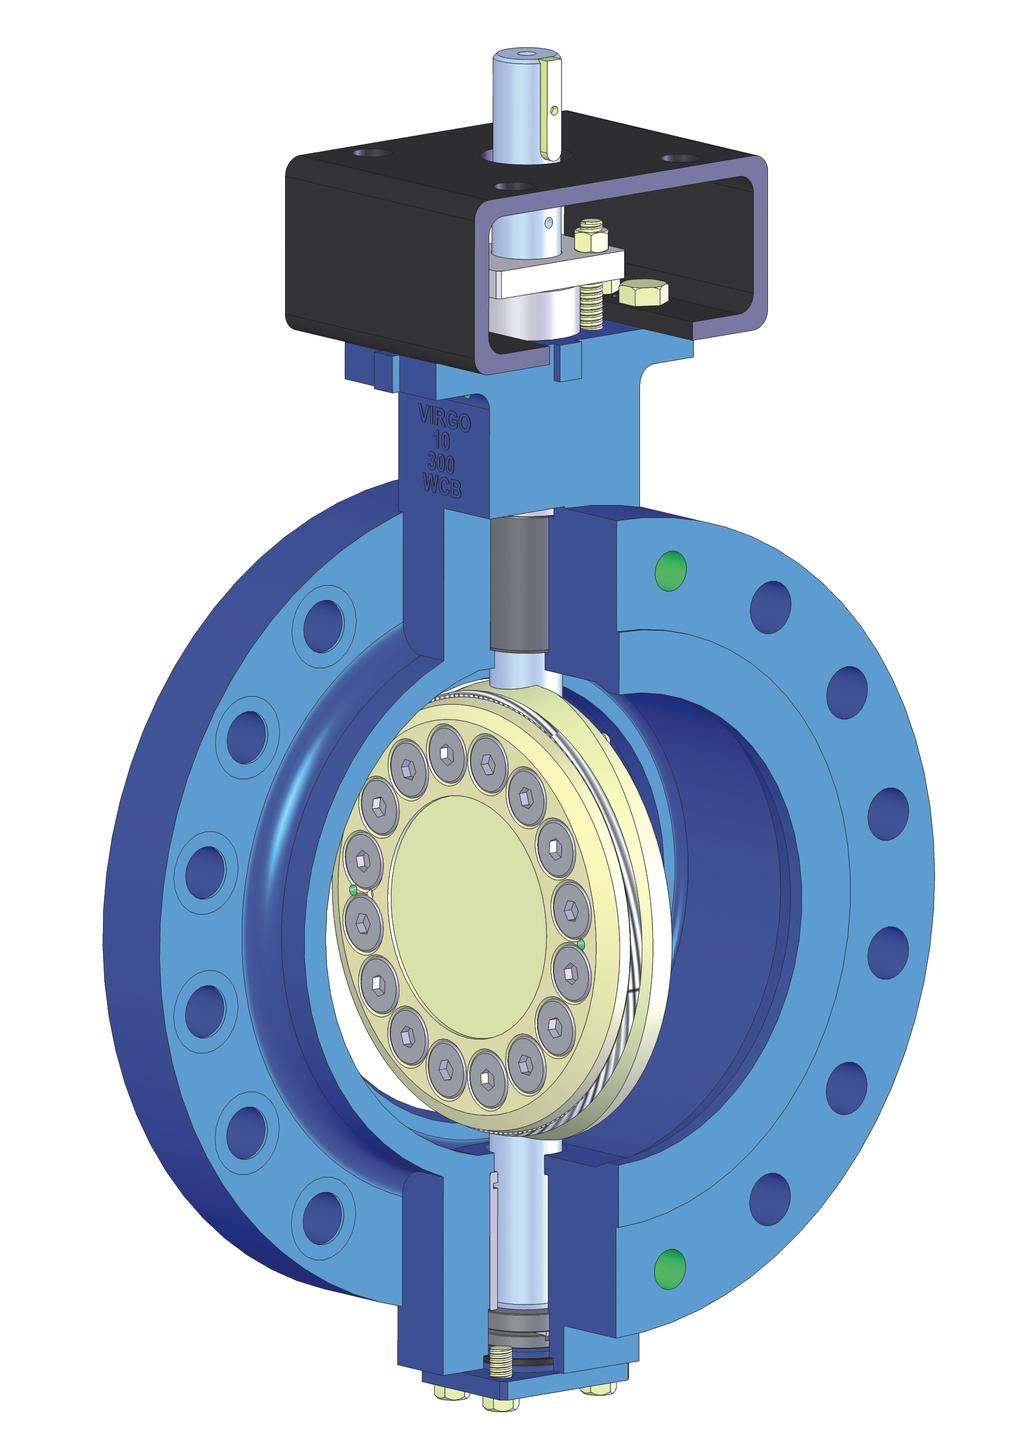 TriTork Triple Offset Valve Design Features : Low Emission Shaft Seal Metal to Metal 'ZERO' Leakage Externally Retained Blow-Out Proof Design Design